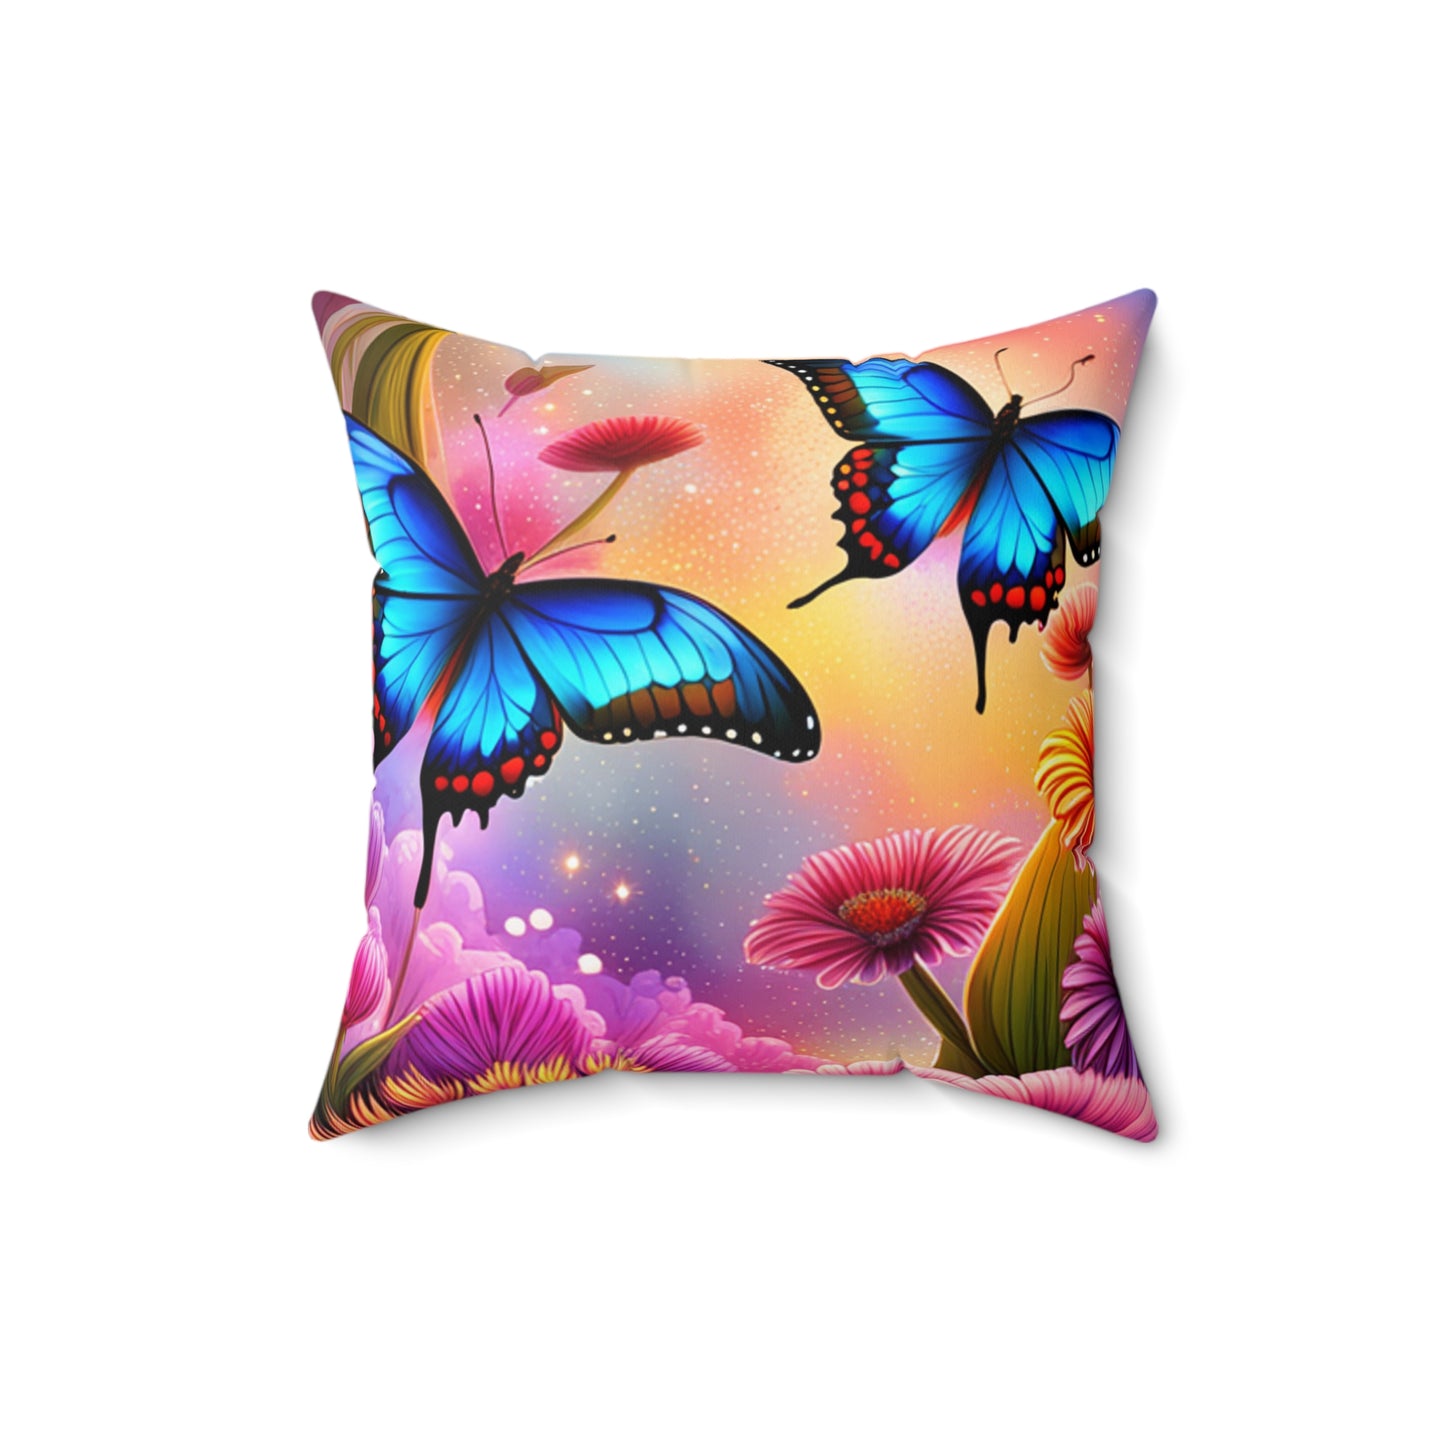 Blue Butterflies and Pink Flowers Spun Polyester Square Pillow, 4 Sizes to Choose From